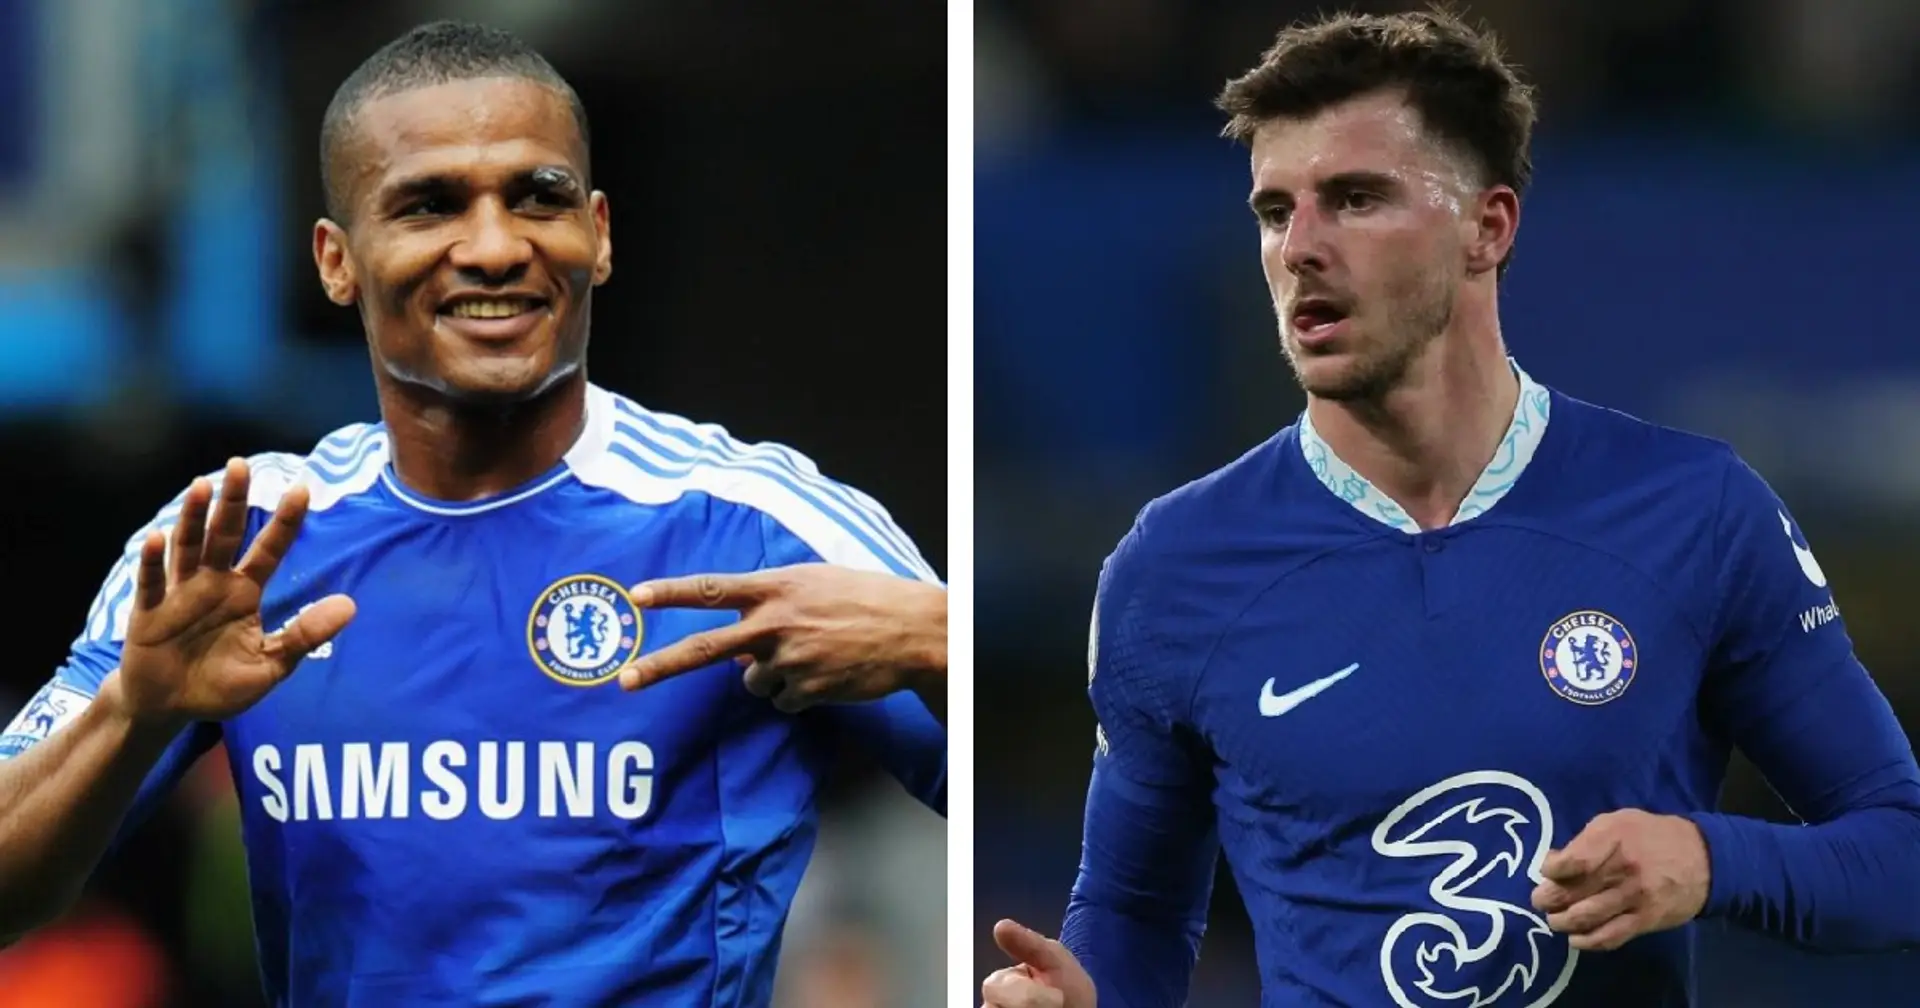 'He is the DNA for Chelsea': Malouda urges Mount to stay at club amid transfer links